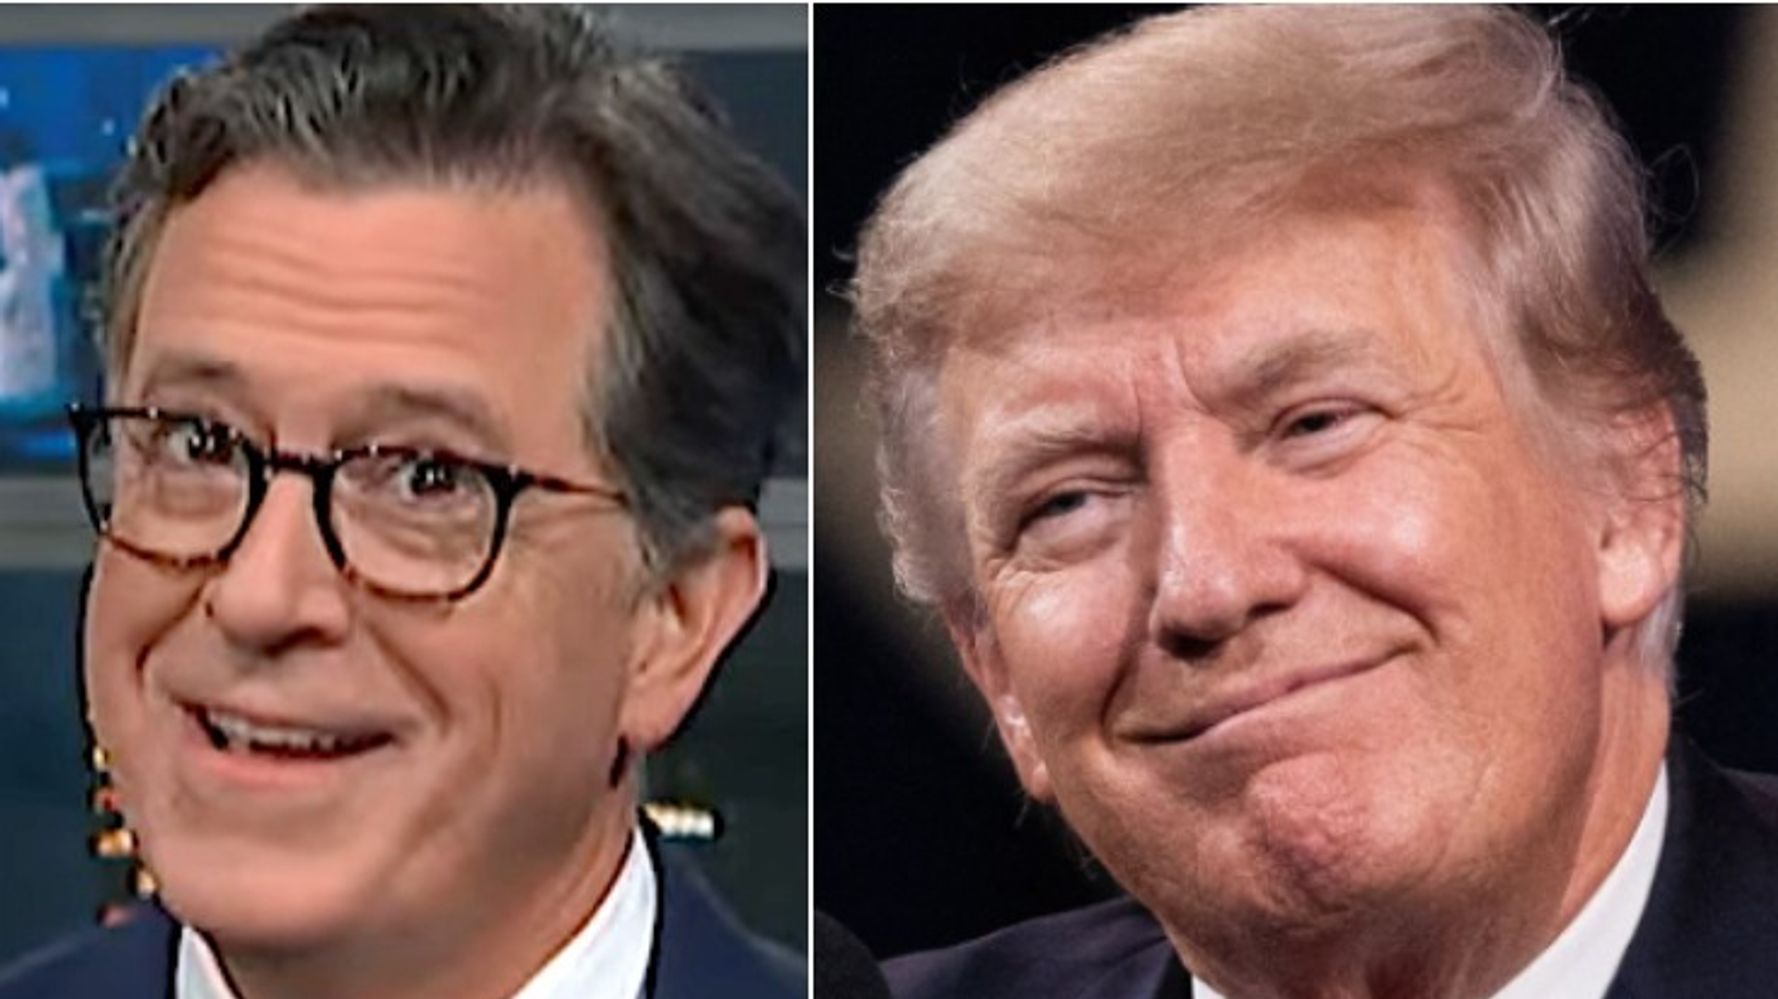 Stephen Colbert Gets Fiery With Burning Idea For How Trump Can Celebrate His Rioters